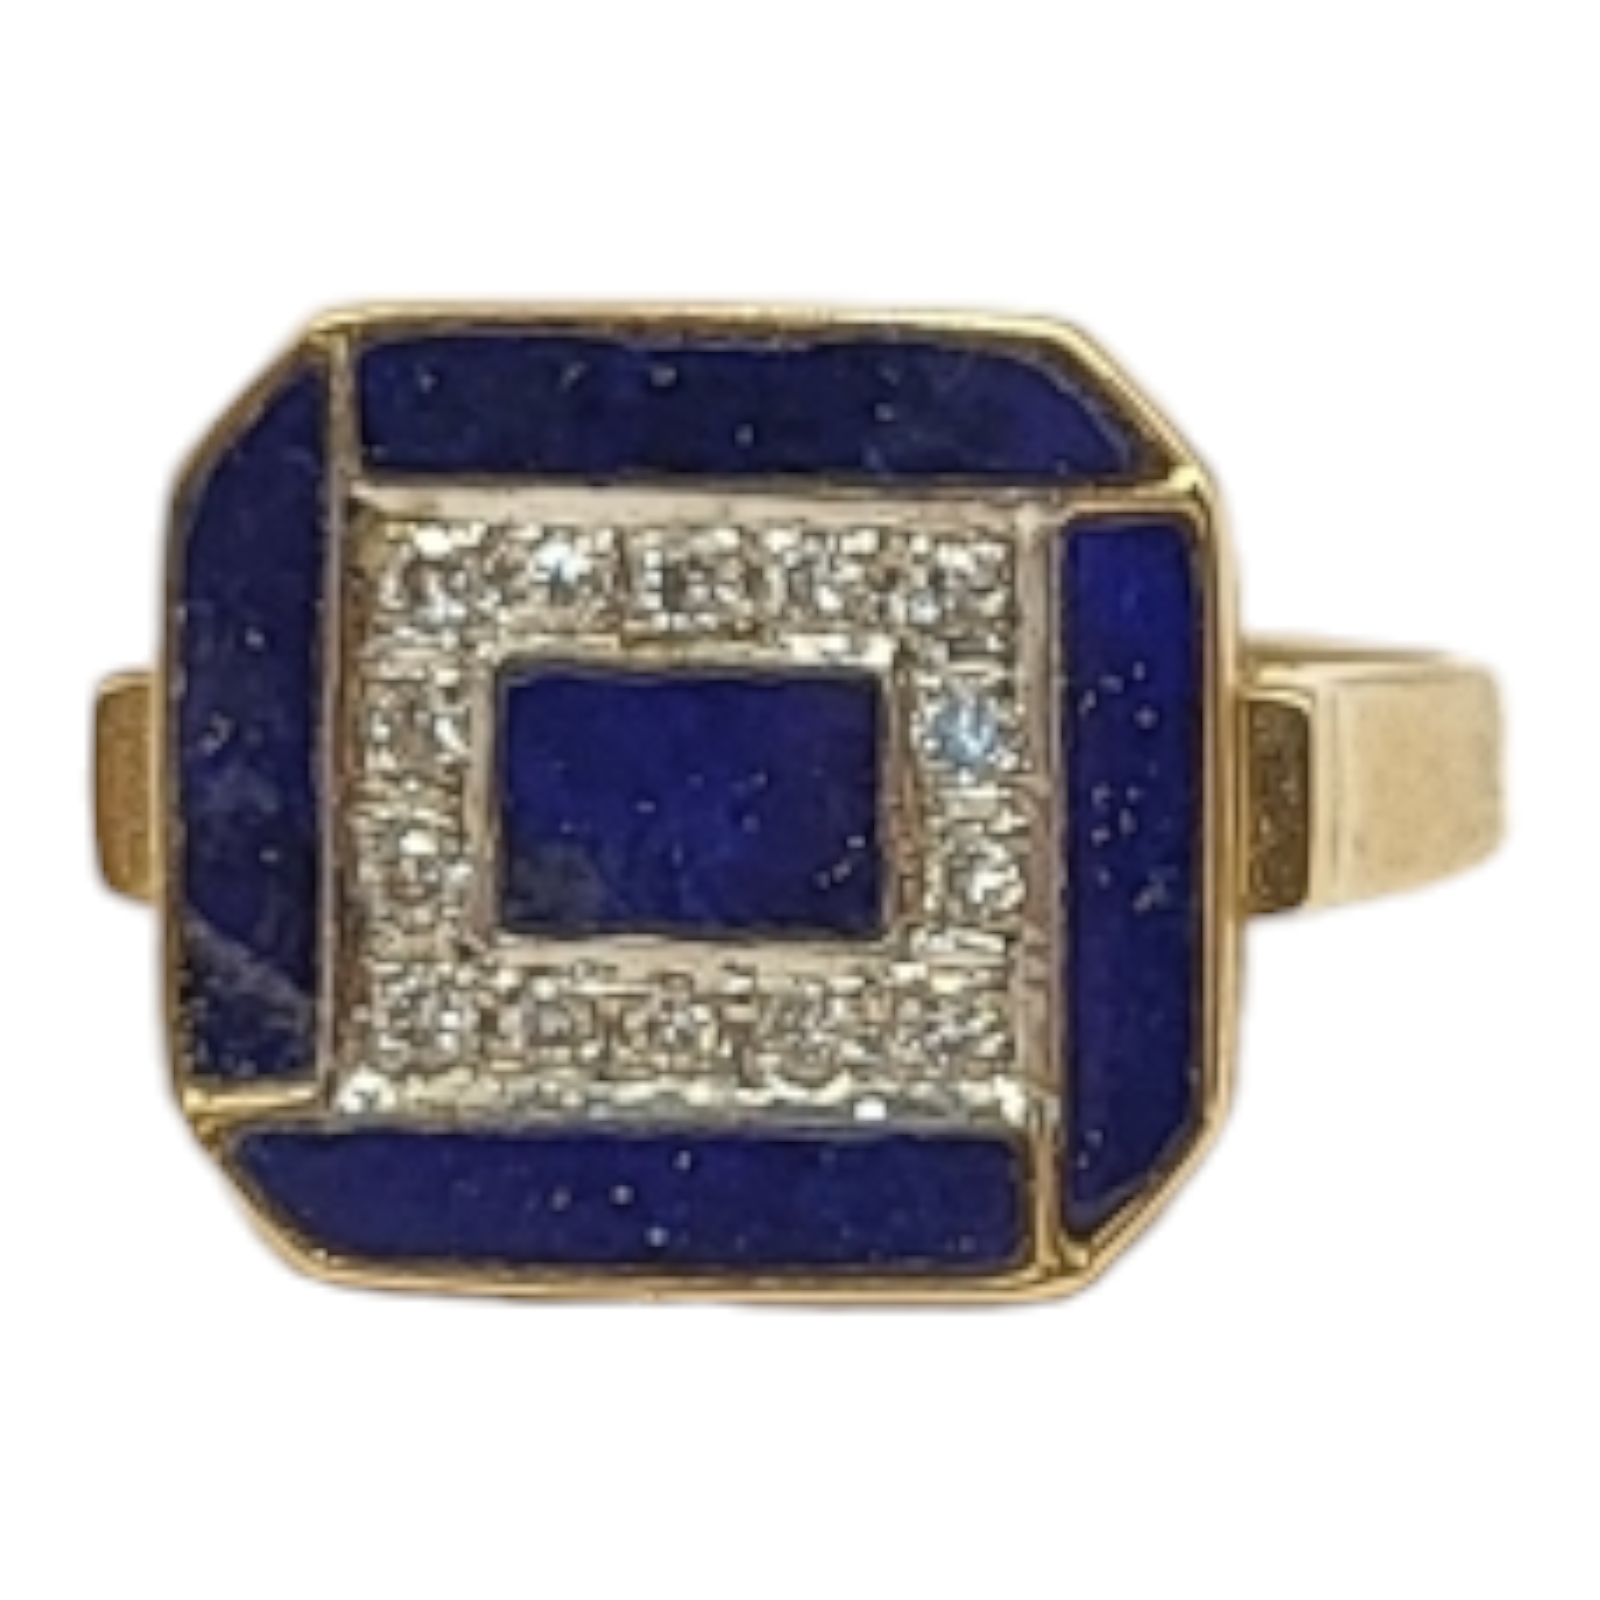 A CONTINENTAL 14CT GOLD, DIAMOND AND LAPIS LAZULI RING Having a row of round cut diamonds edged with - Image 4 of 5